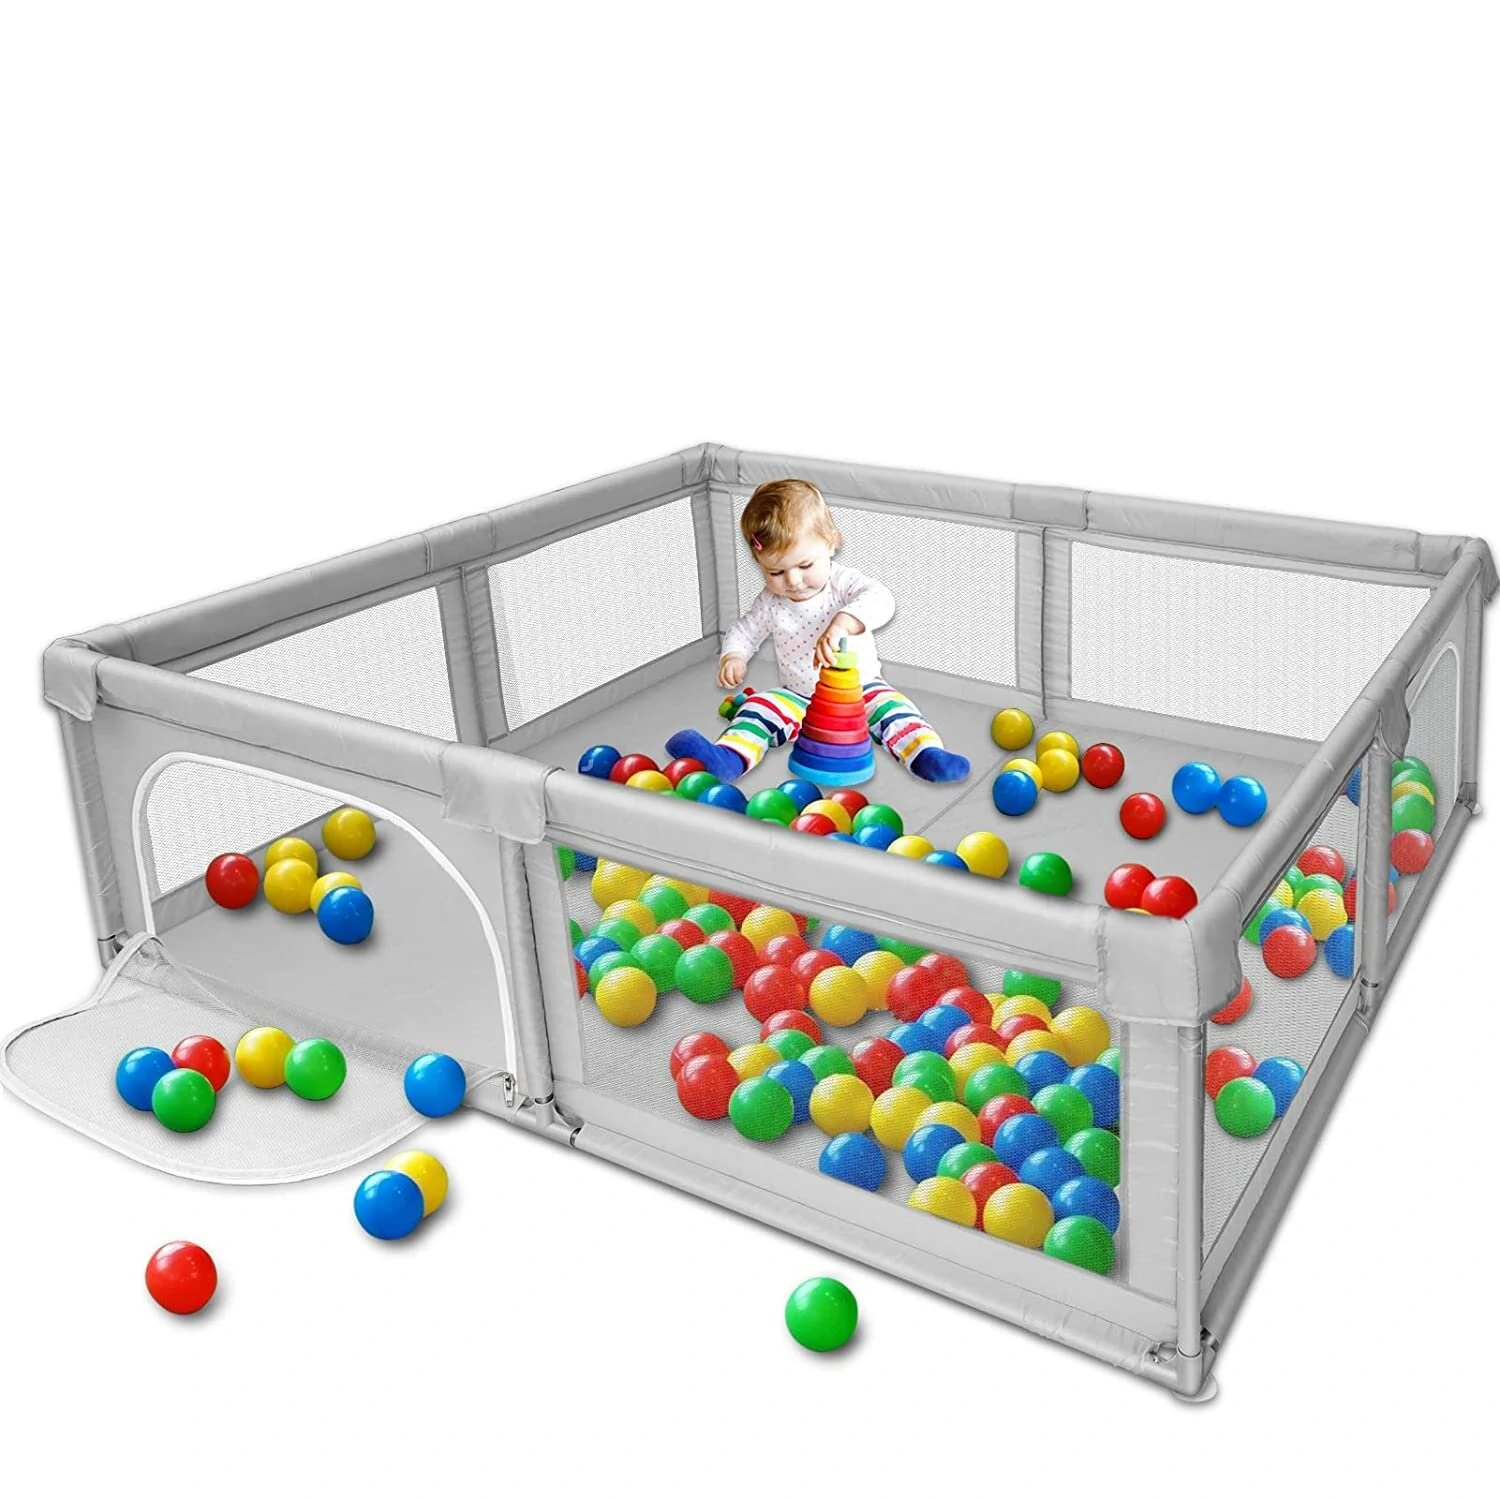 Bioby Baby Playpen 360 Wide View Children Playpen Baby Playground Safety Fence Anti collosion Children Baby Ball Pool Activity Play Pen